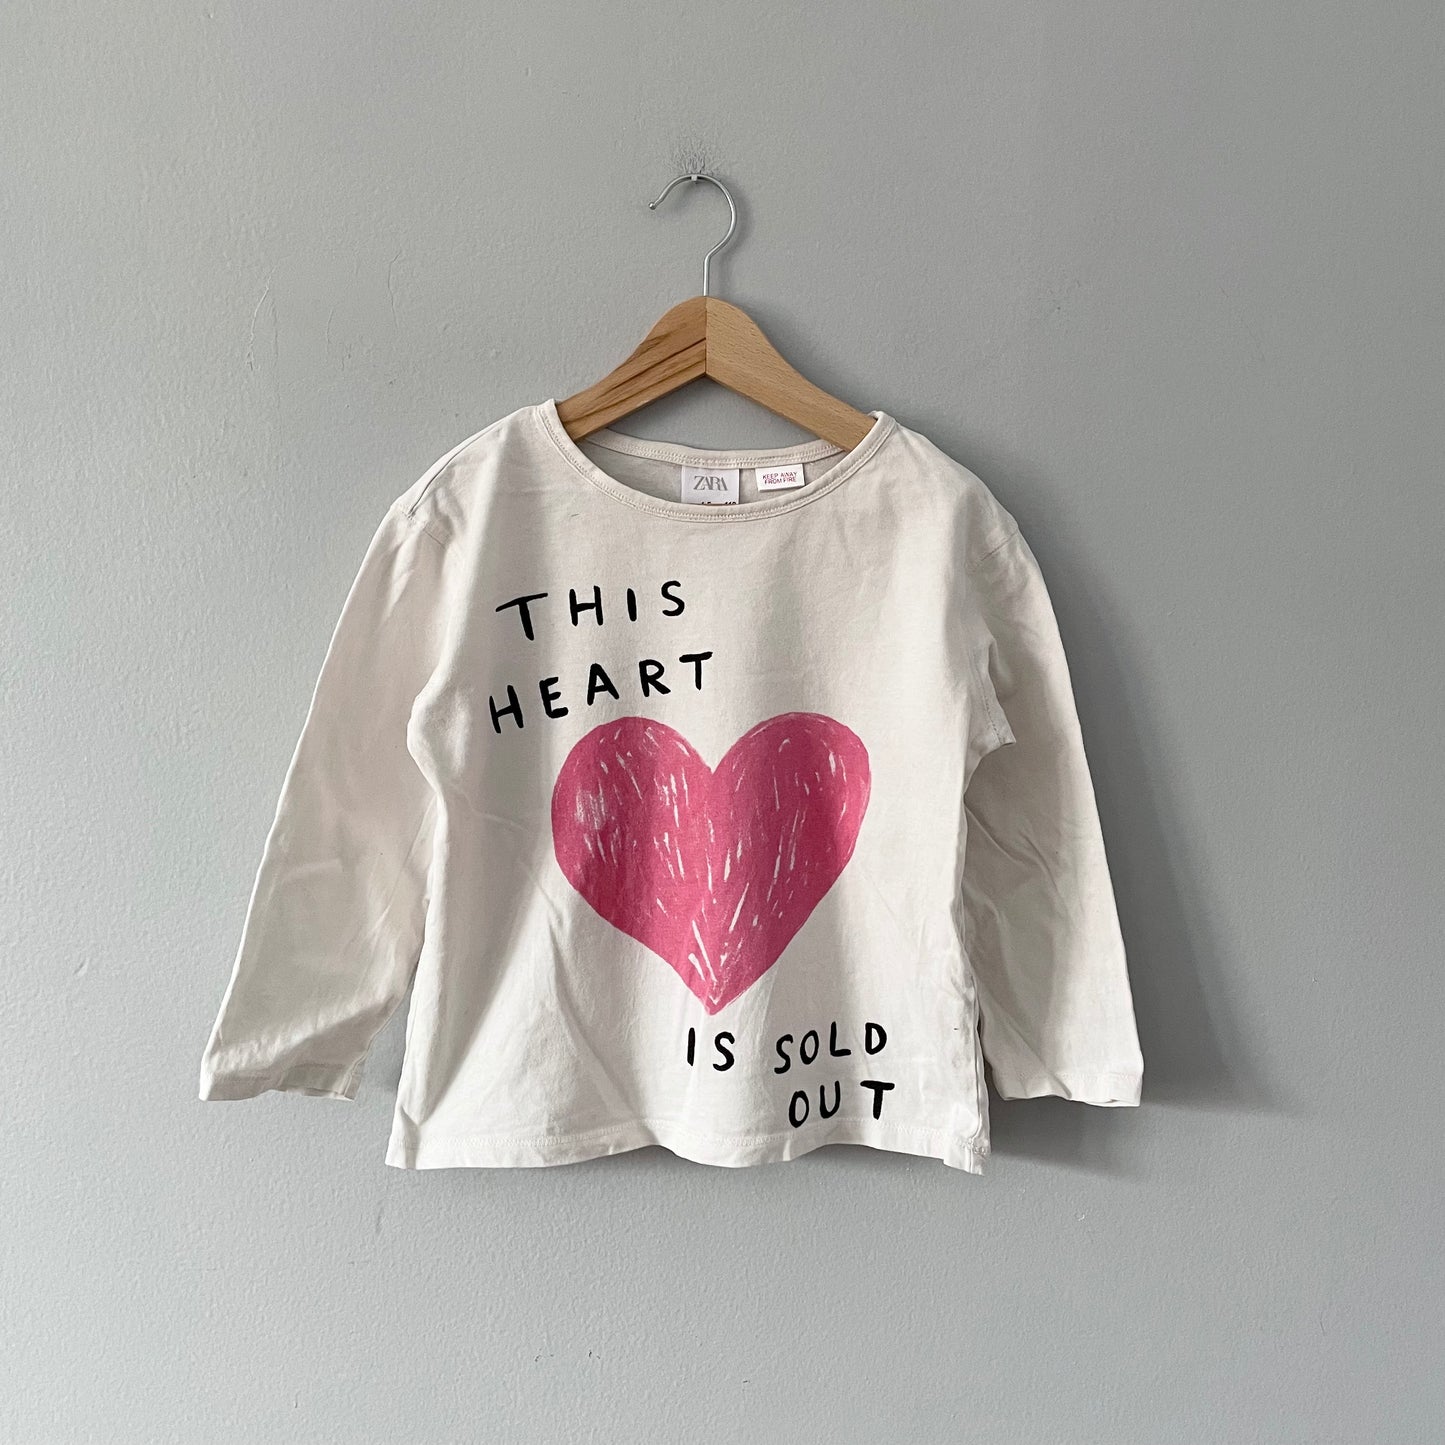 Zara / This heart is sold out T-shirt / 4-5Y